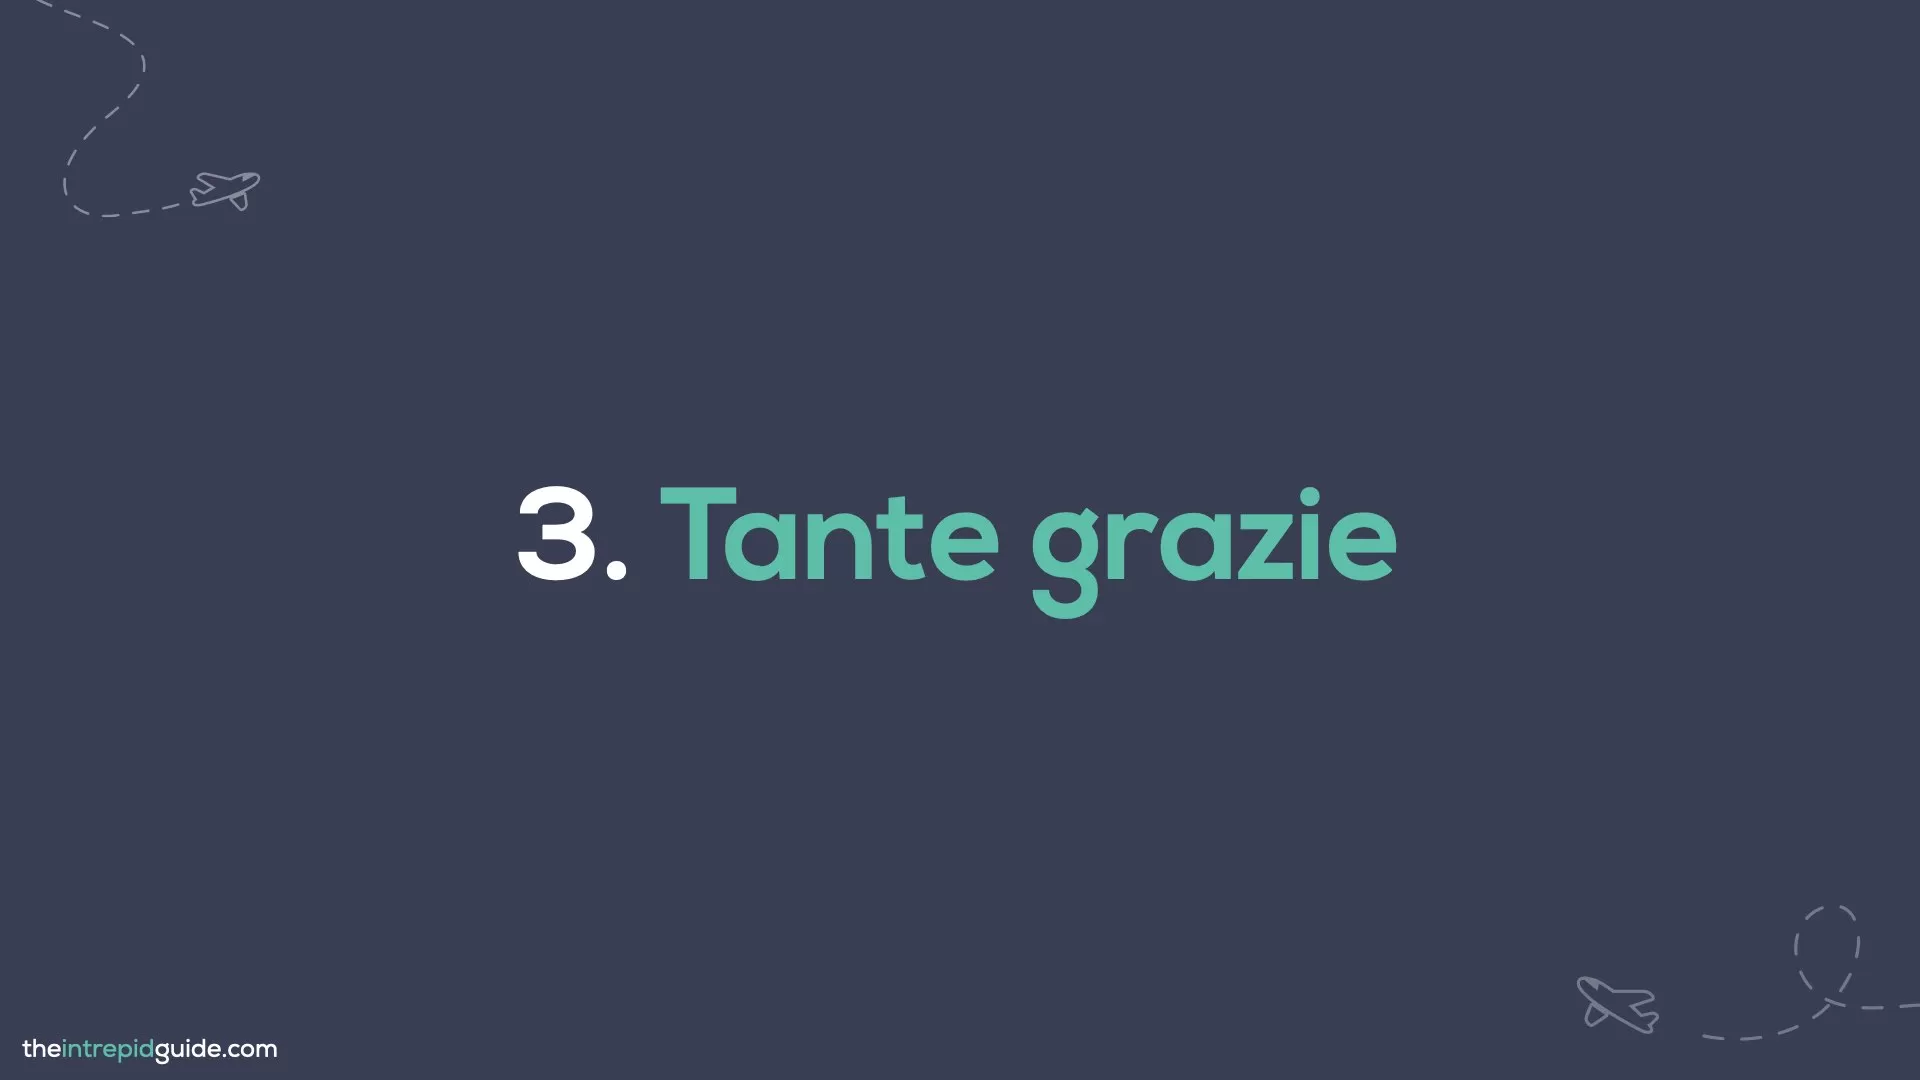 How to say thank you in Italian - Tante grazie